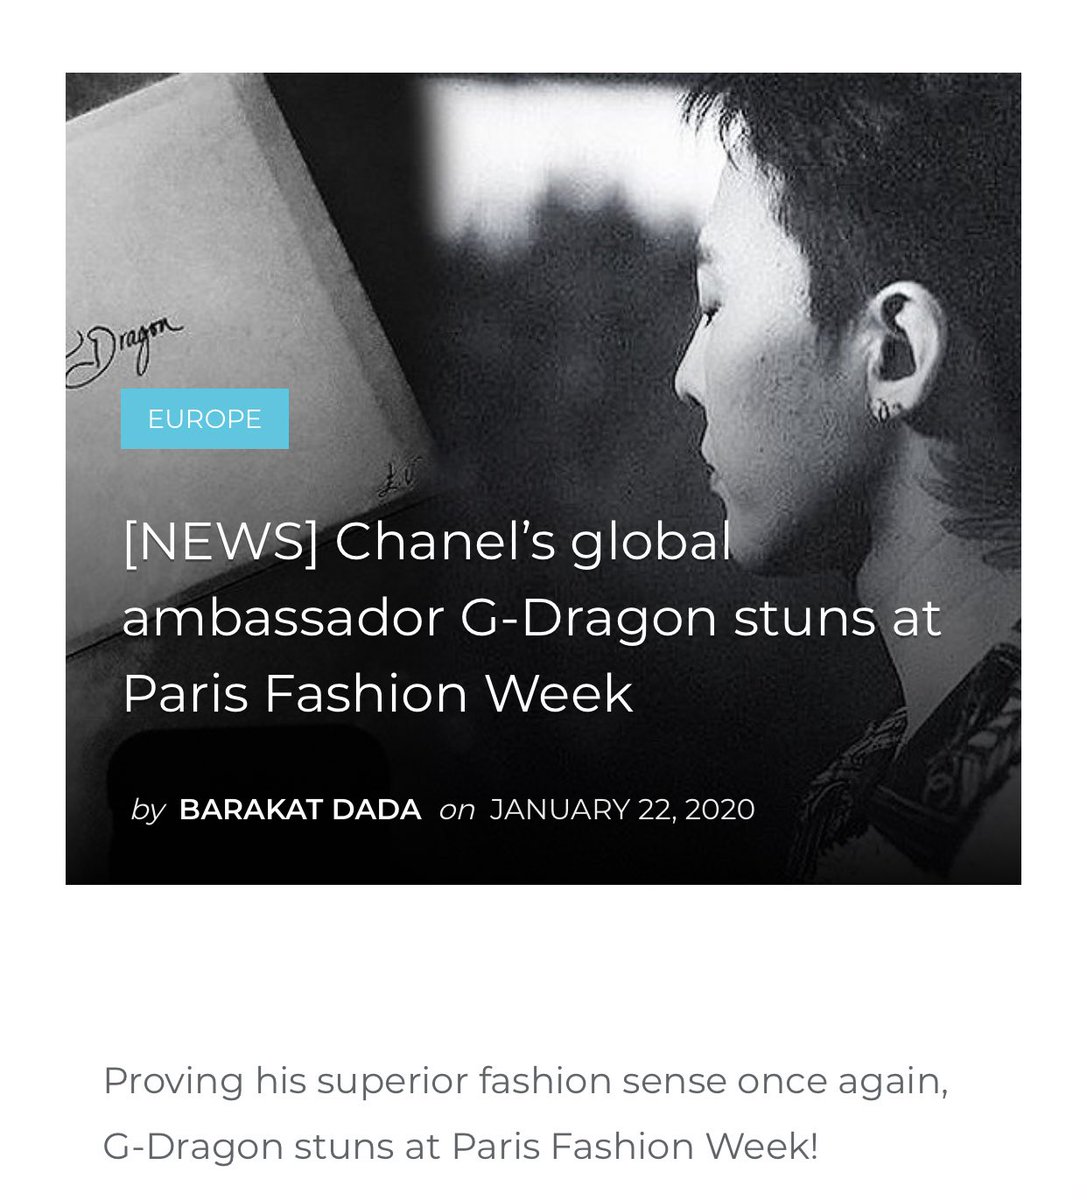 Jennie was called CHANEL Korea Ambassadors in 2018 before Chanel with ELLE announced her as the new house ambassador following Gdragon in 2019. VOGUE also called her Global Ambassadors so a citizens like you would get it.